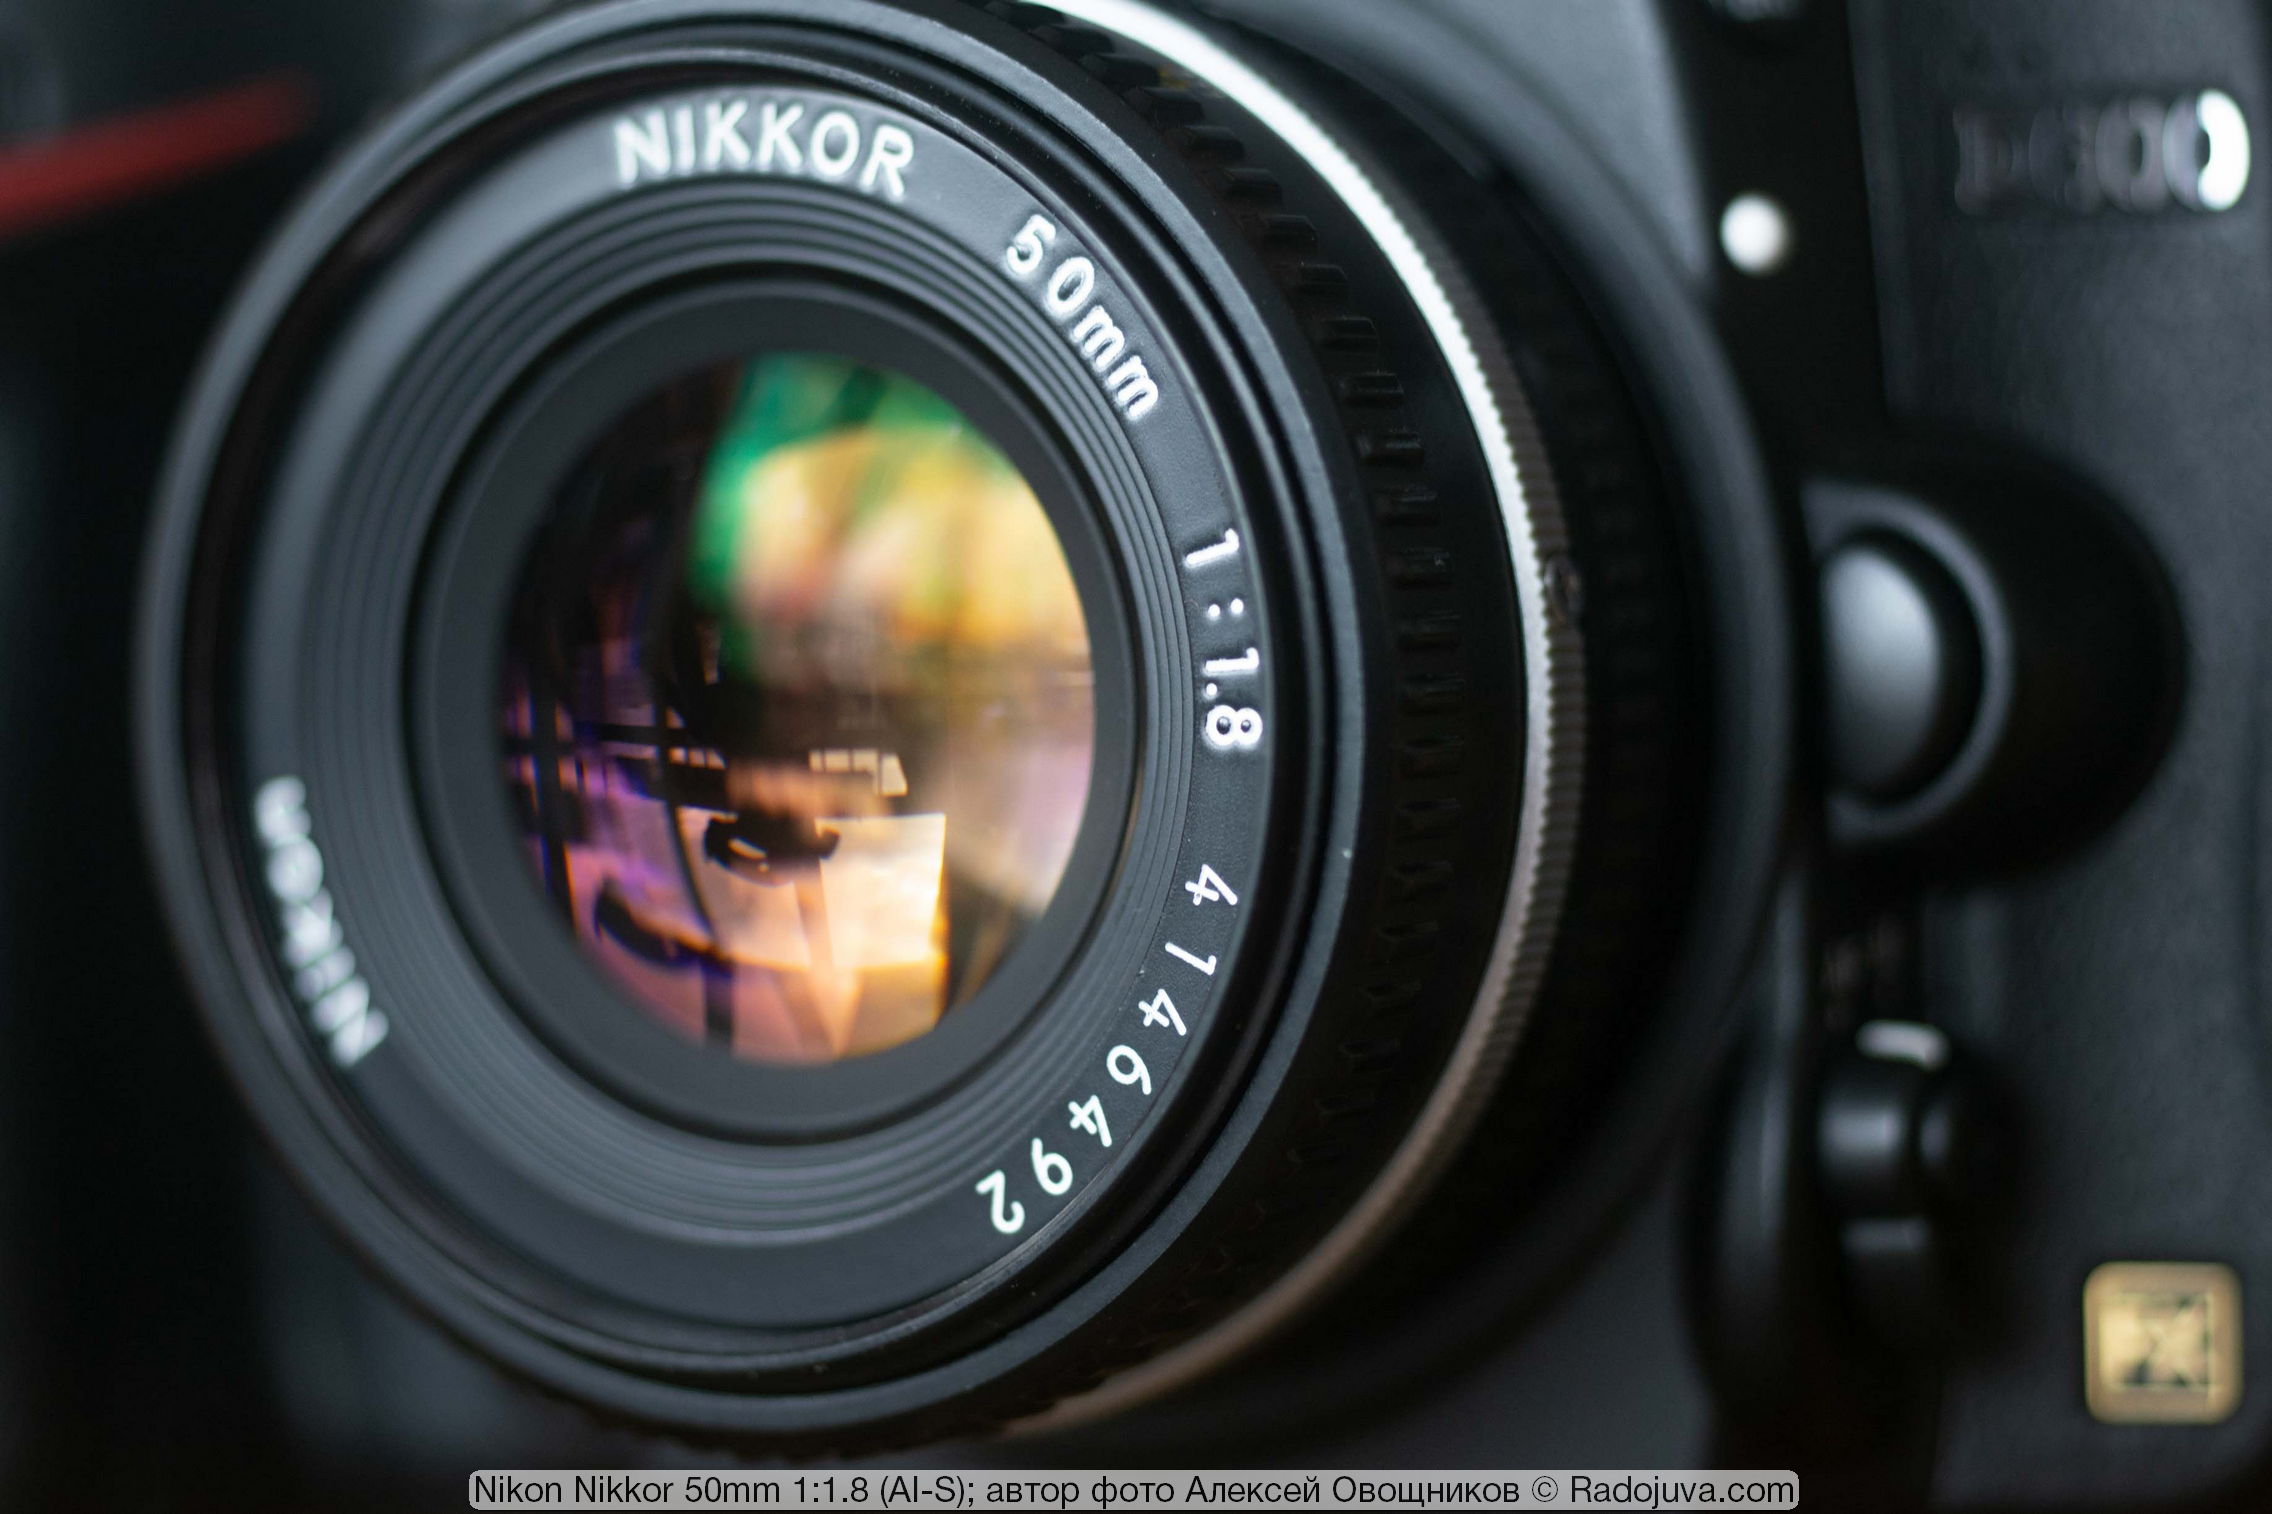 Nikon Nikkor 50mm 1: 1.8 (AI-S). Review from the reader Radozhiva